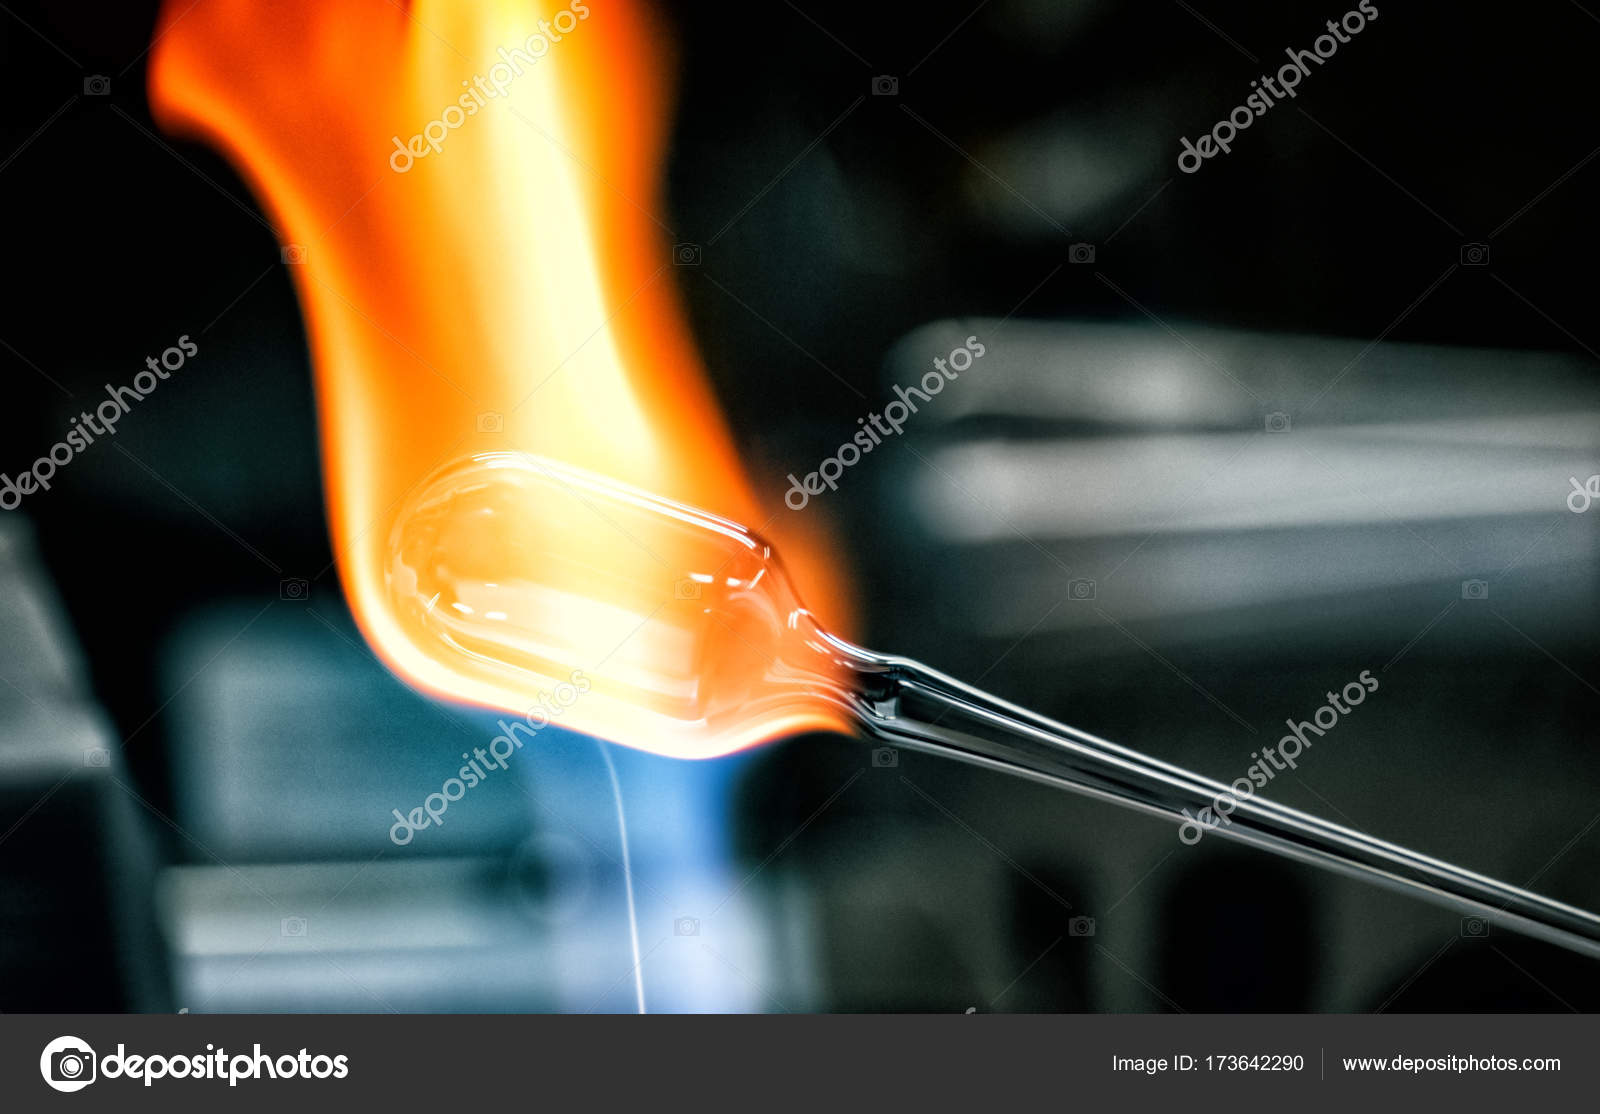 Glass blower forming a chemistry glass, closeup view, glass blower